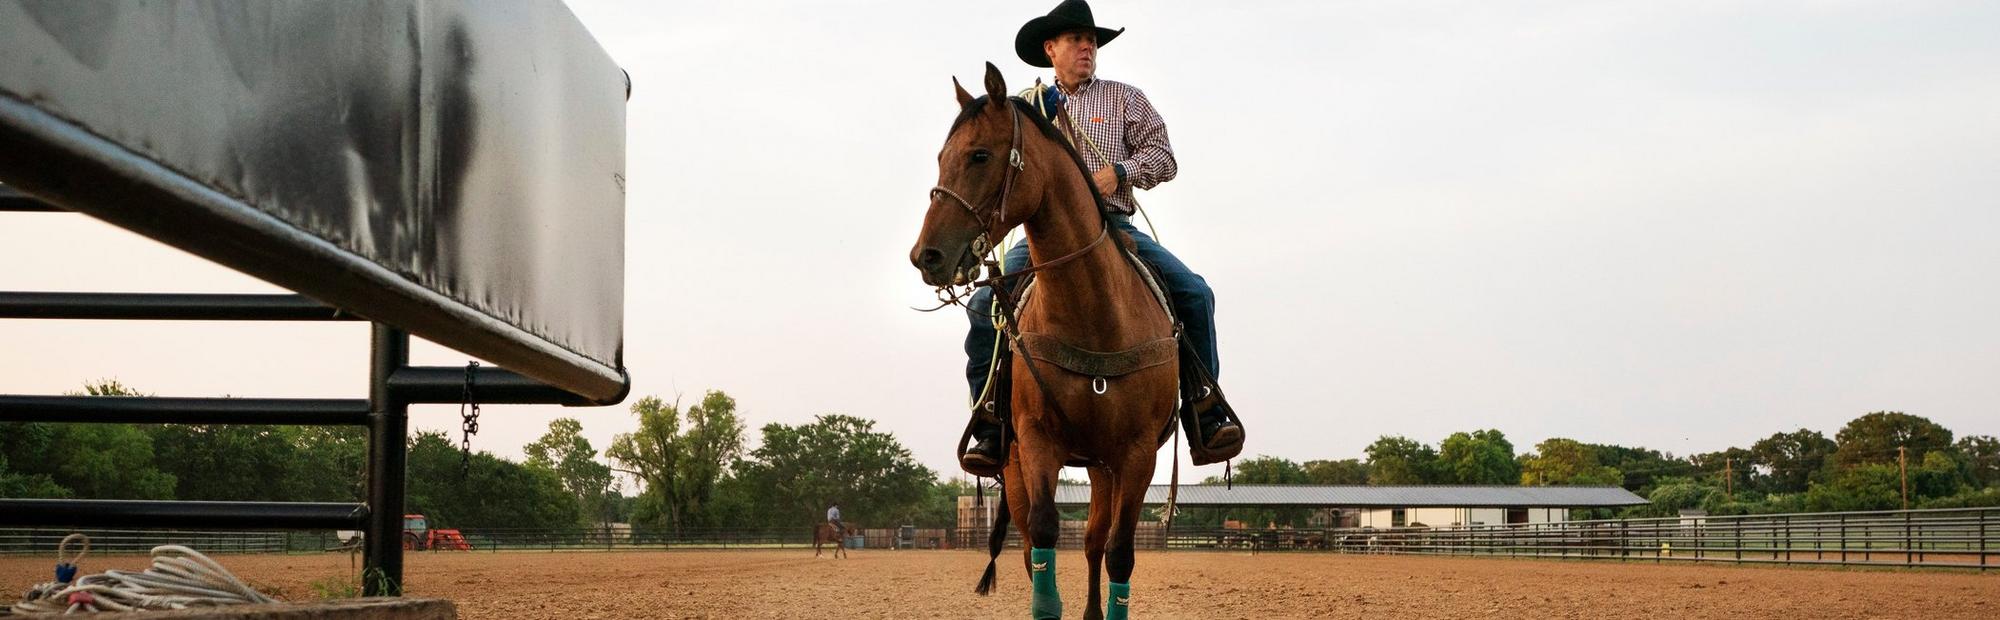 The Top Eight Different Events You'll See at the Rodeo